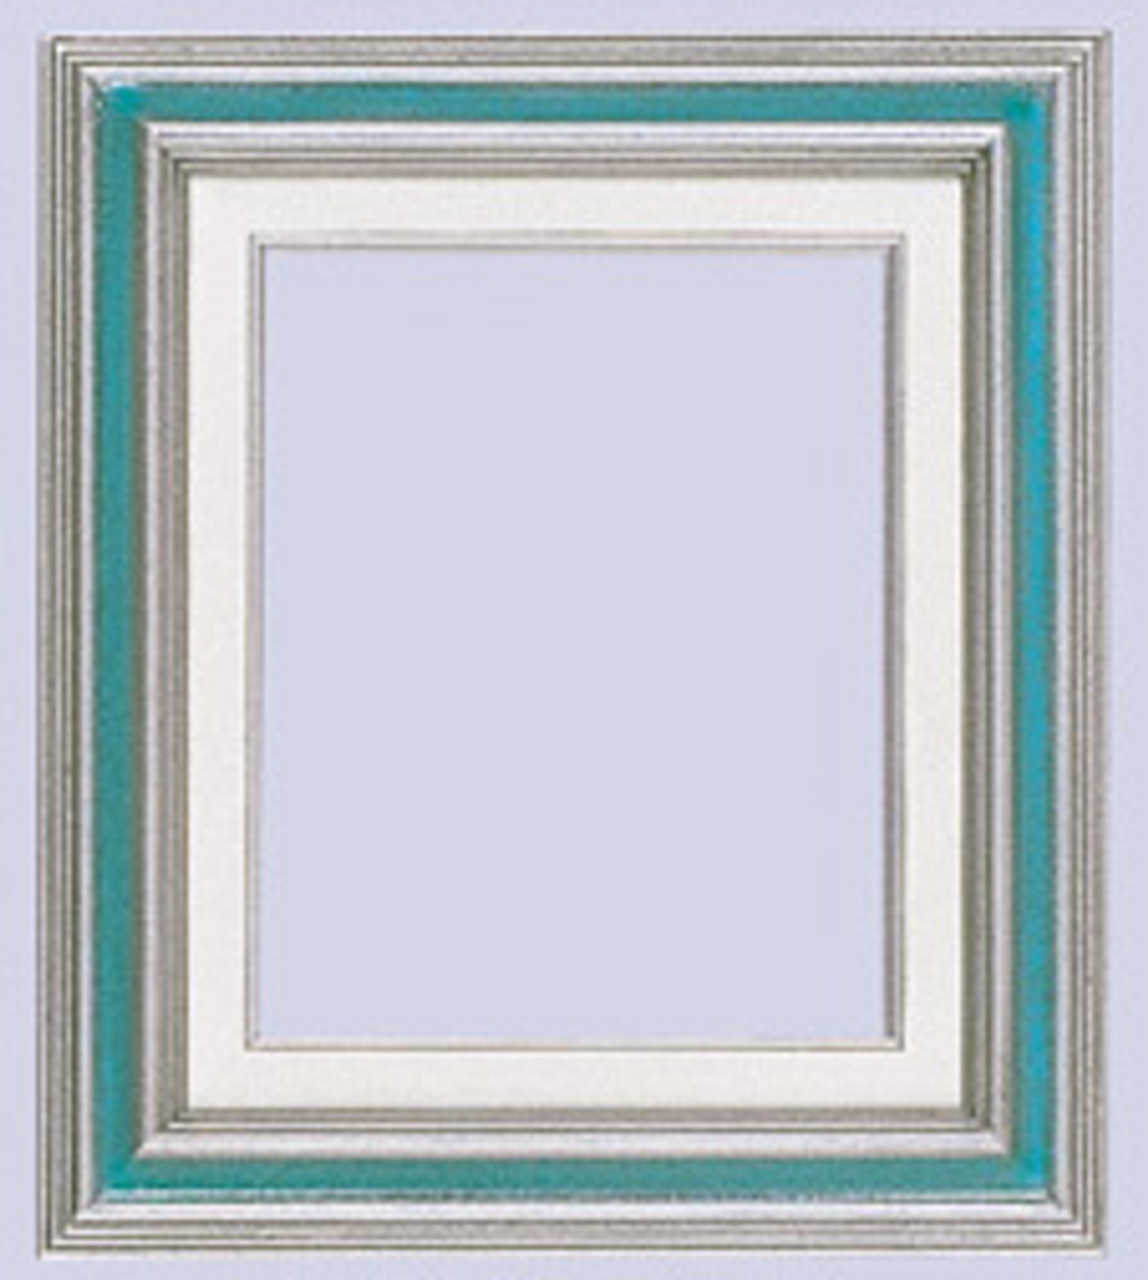 3 Inch Econo Wood Frames With Linen Liners: 9X12*